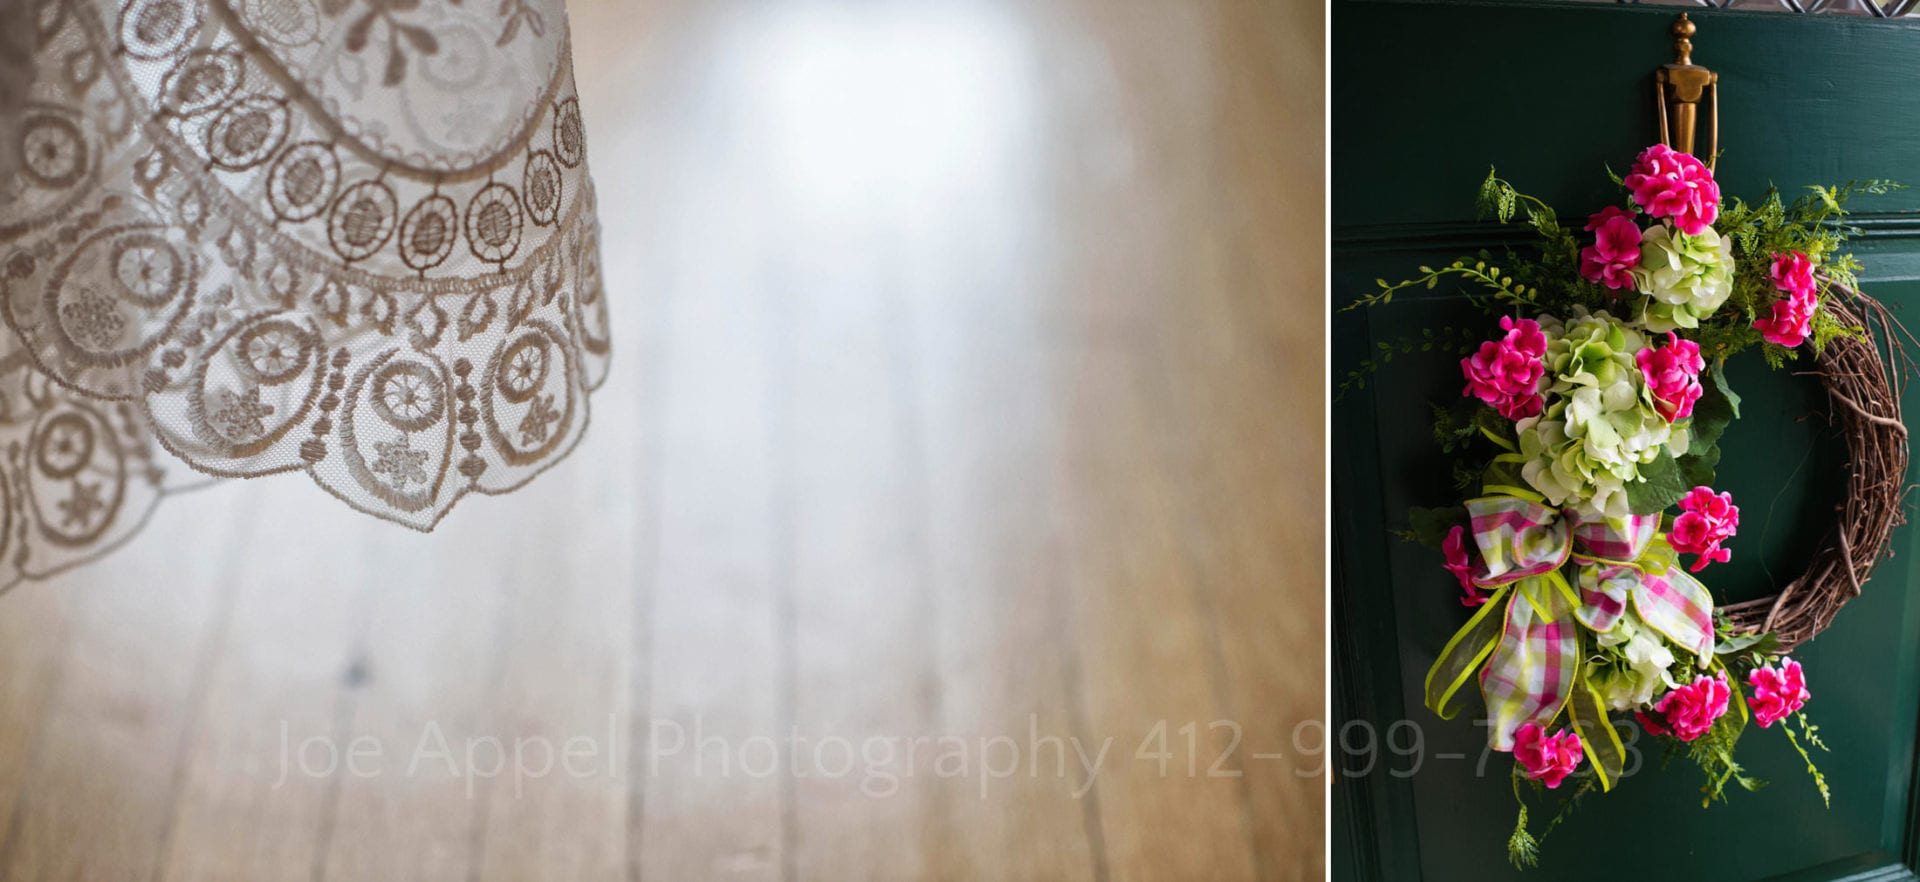 Two photos: a lace end of a wedding dress contrasted against a hardwood floor. A green door with a wreath of pink roses hanging from it.